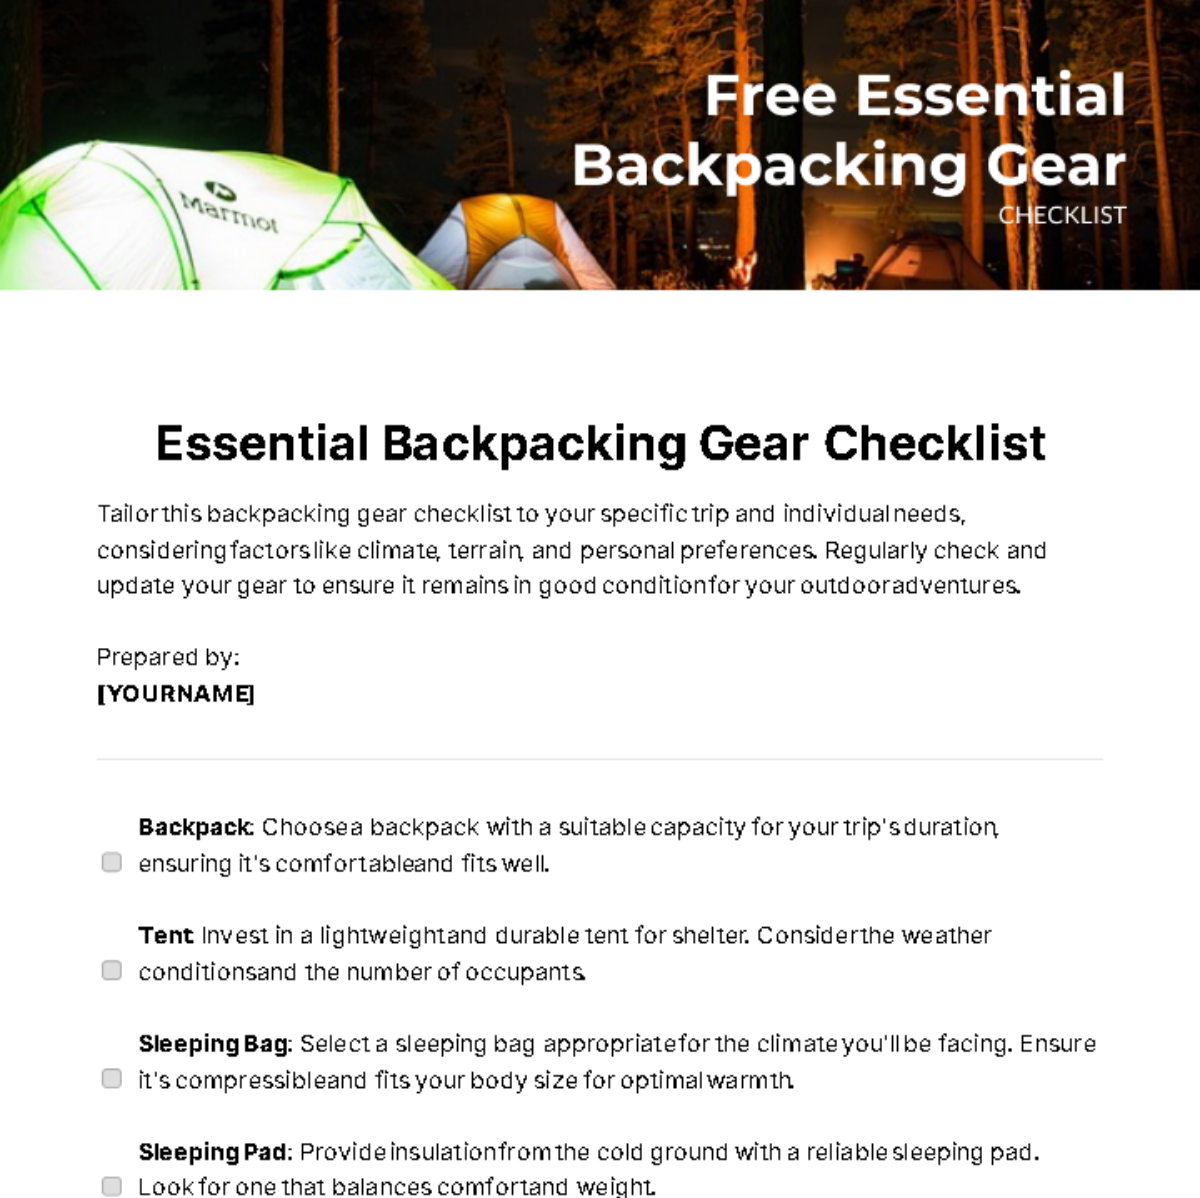 Free Essential Backpacking Gear Checklist Template